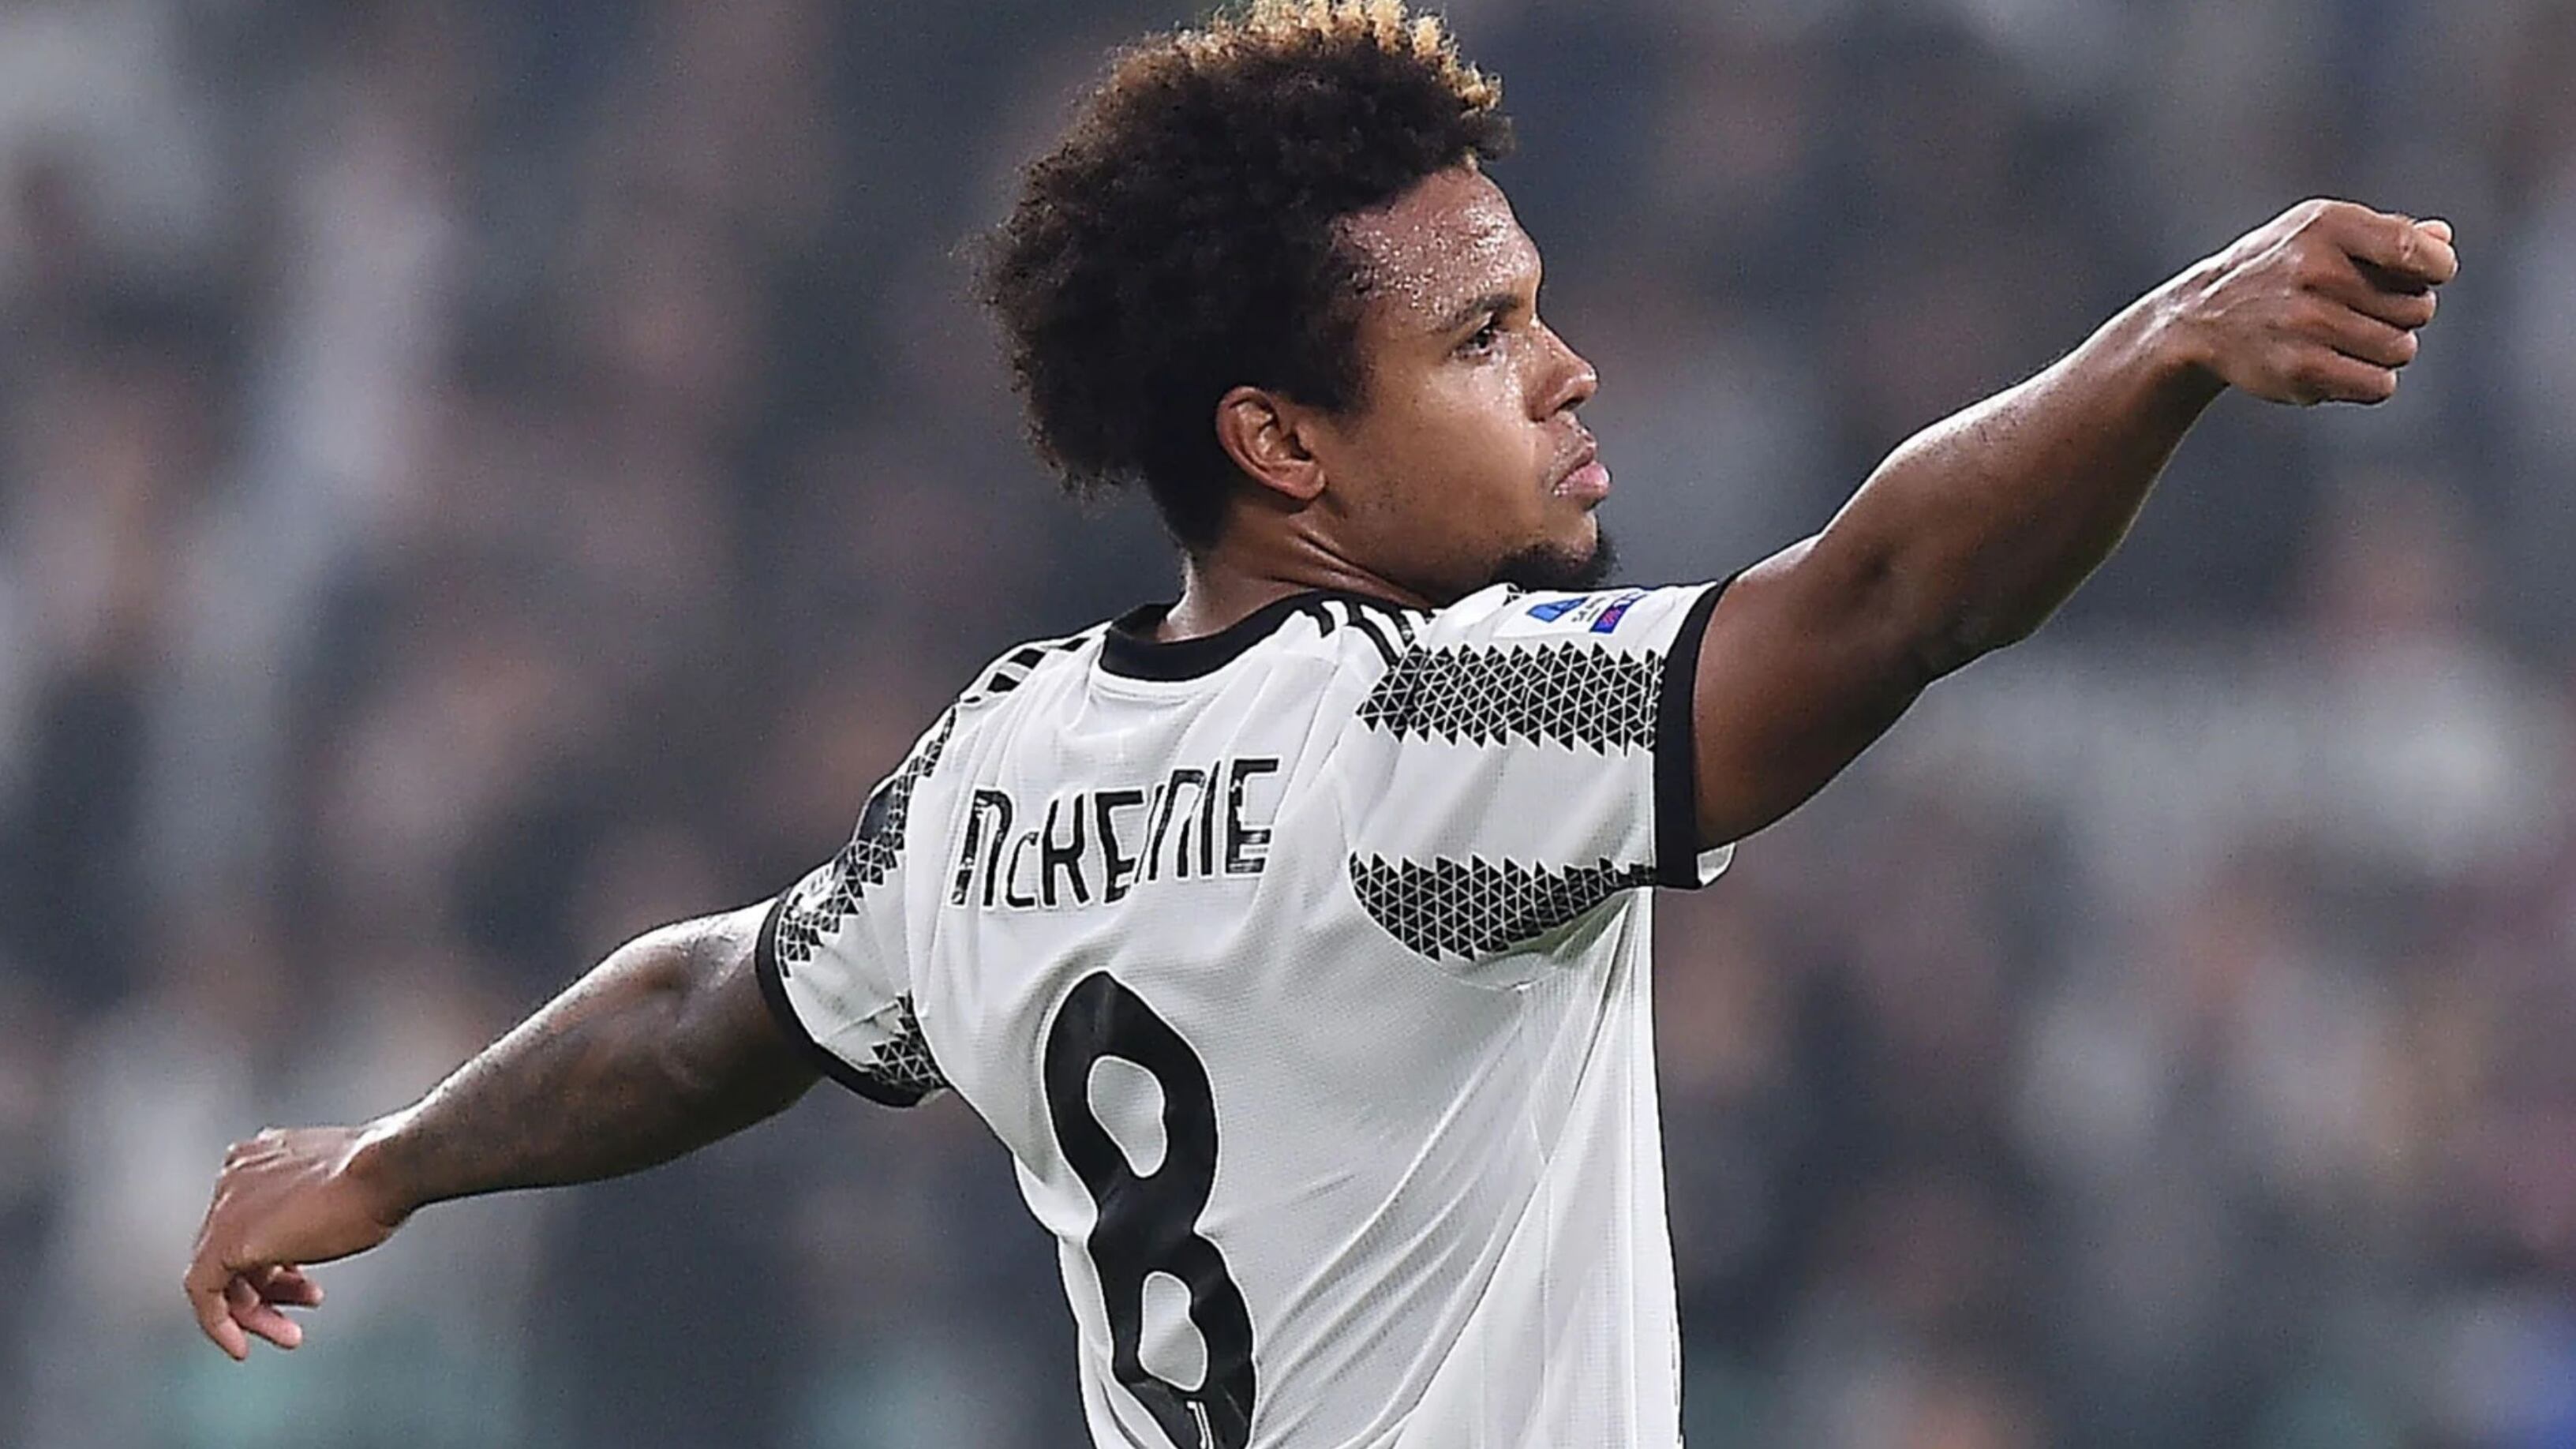 Juventus wants 25 million for McKennie, the club that could pay that figure